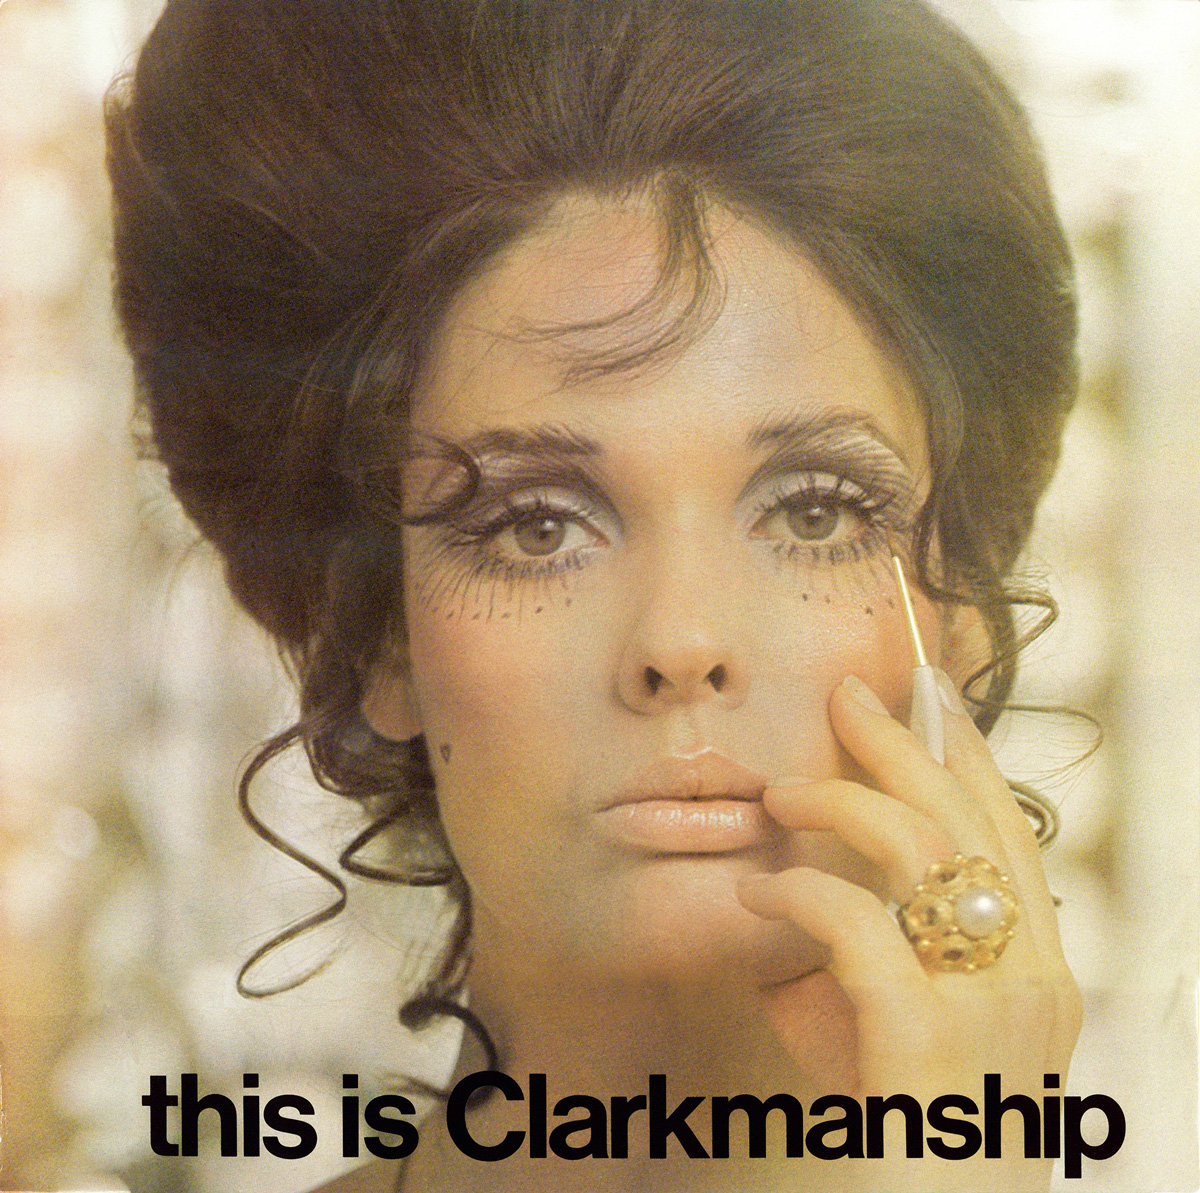 A 1970 album cover for a Clark Equipment show, titled “This is Clarkmanship.”